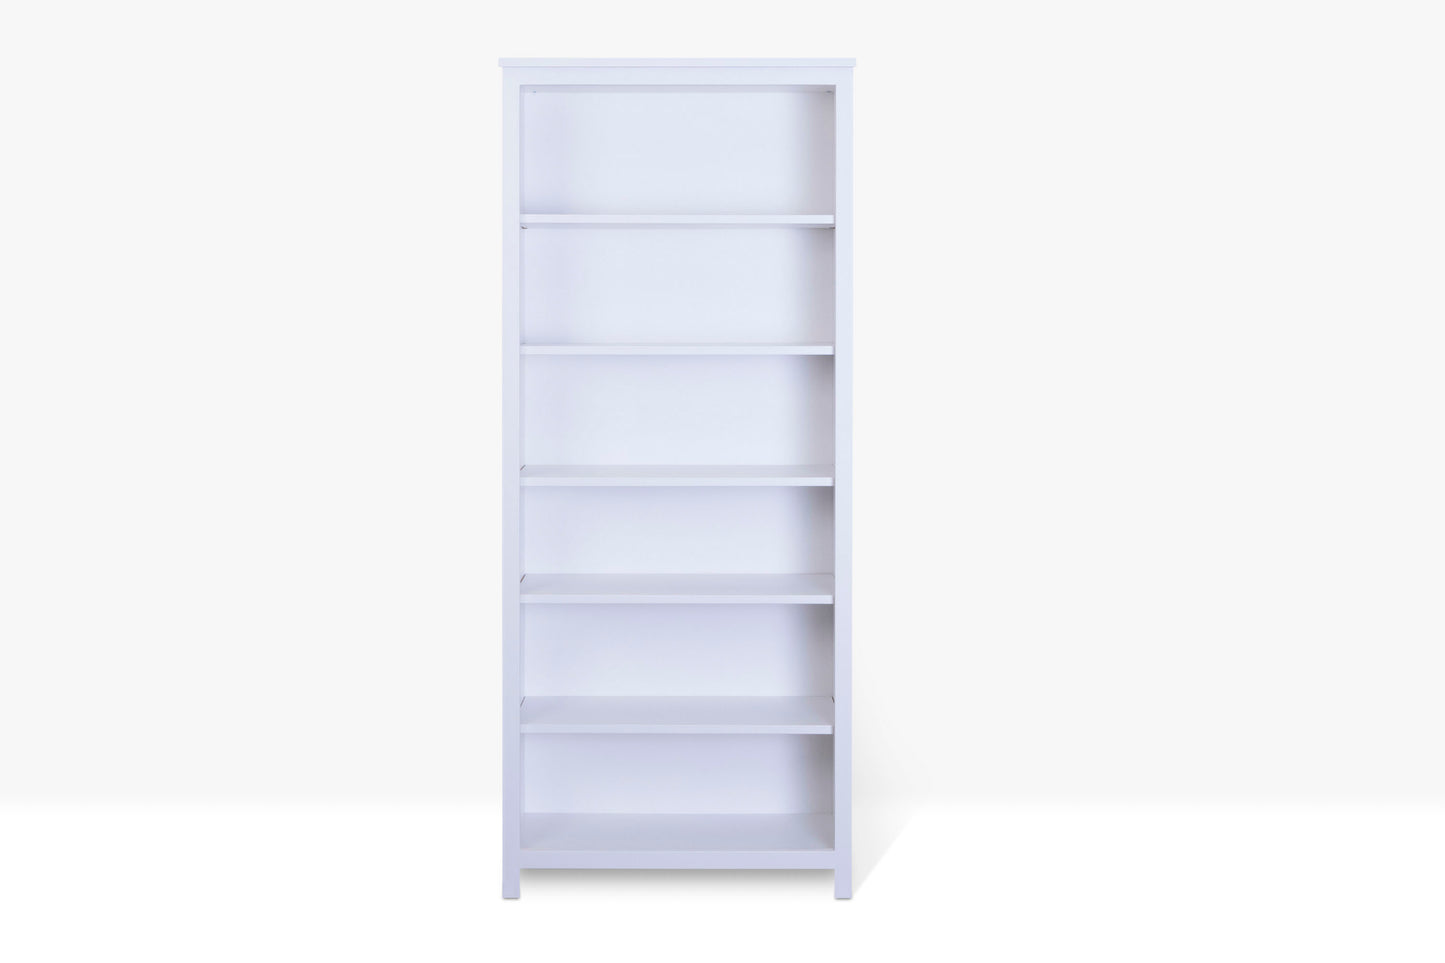 Acadia Tremont Bookcase Show empty in white finish. Made with birch.